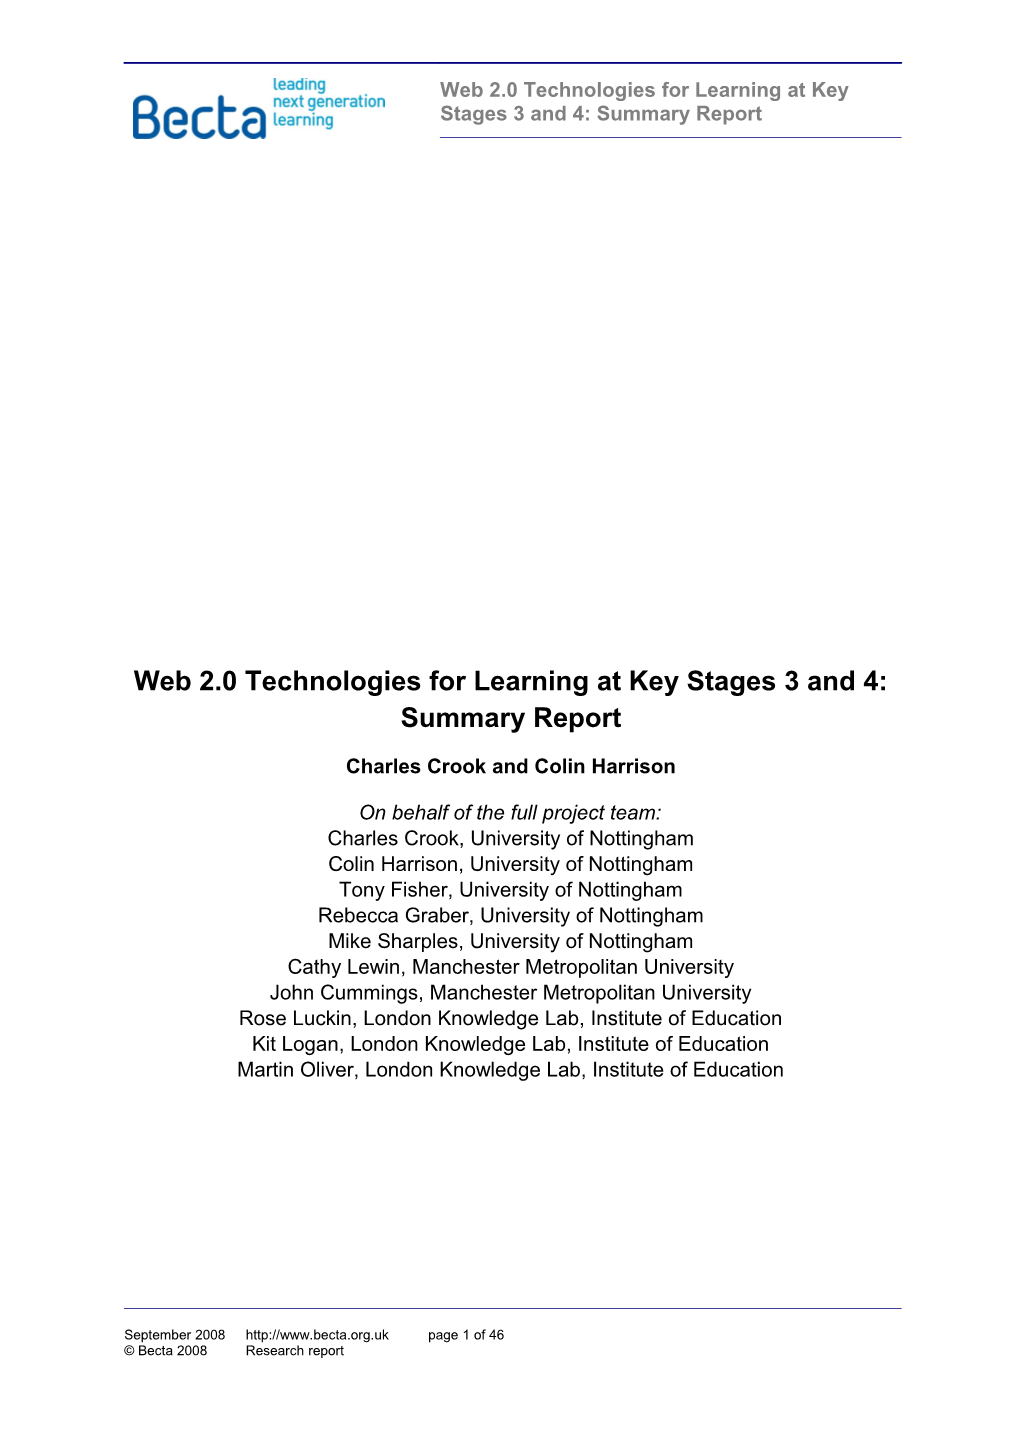 Web 2.0 Technologies for Learning at Key Stages 3 and 4